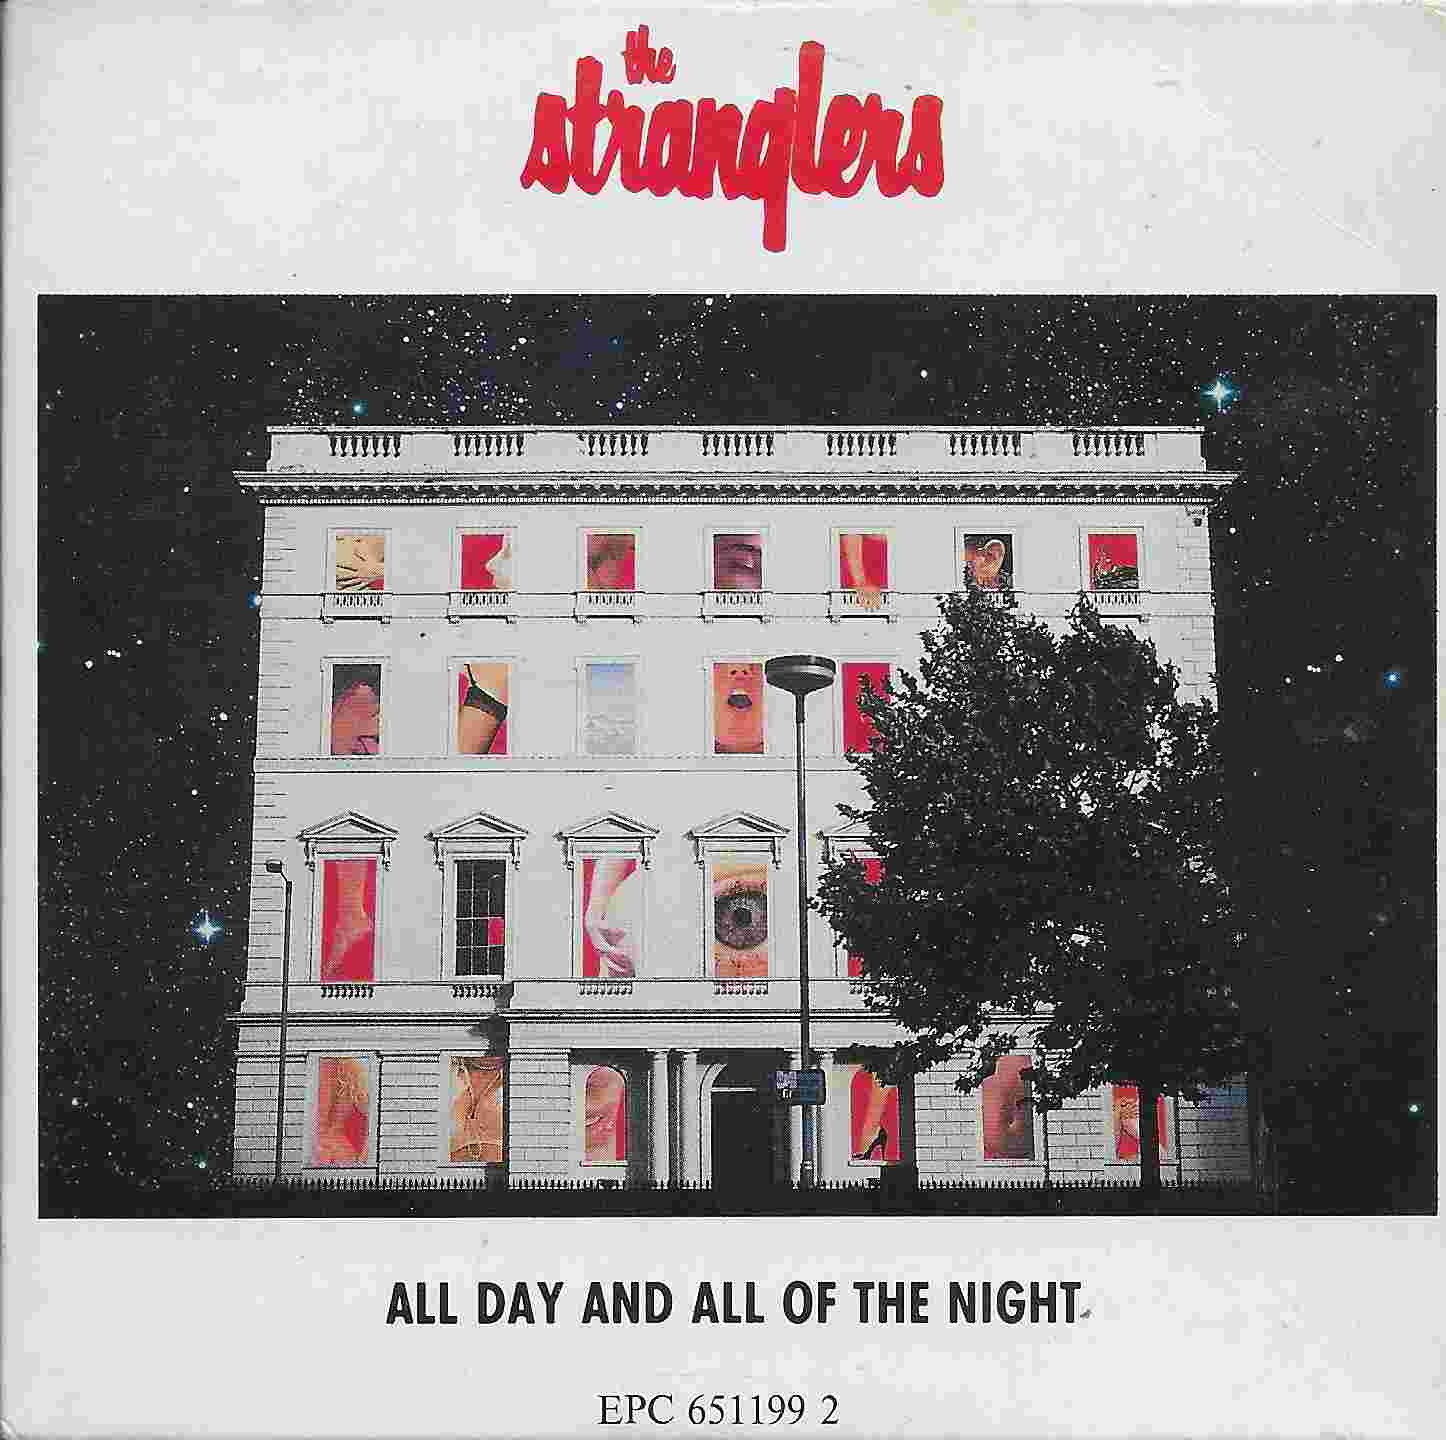 Picture of 651199 2 All day and all of the night by artist The Stranglers 